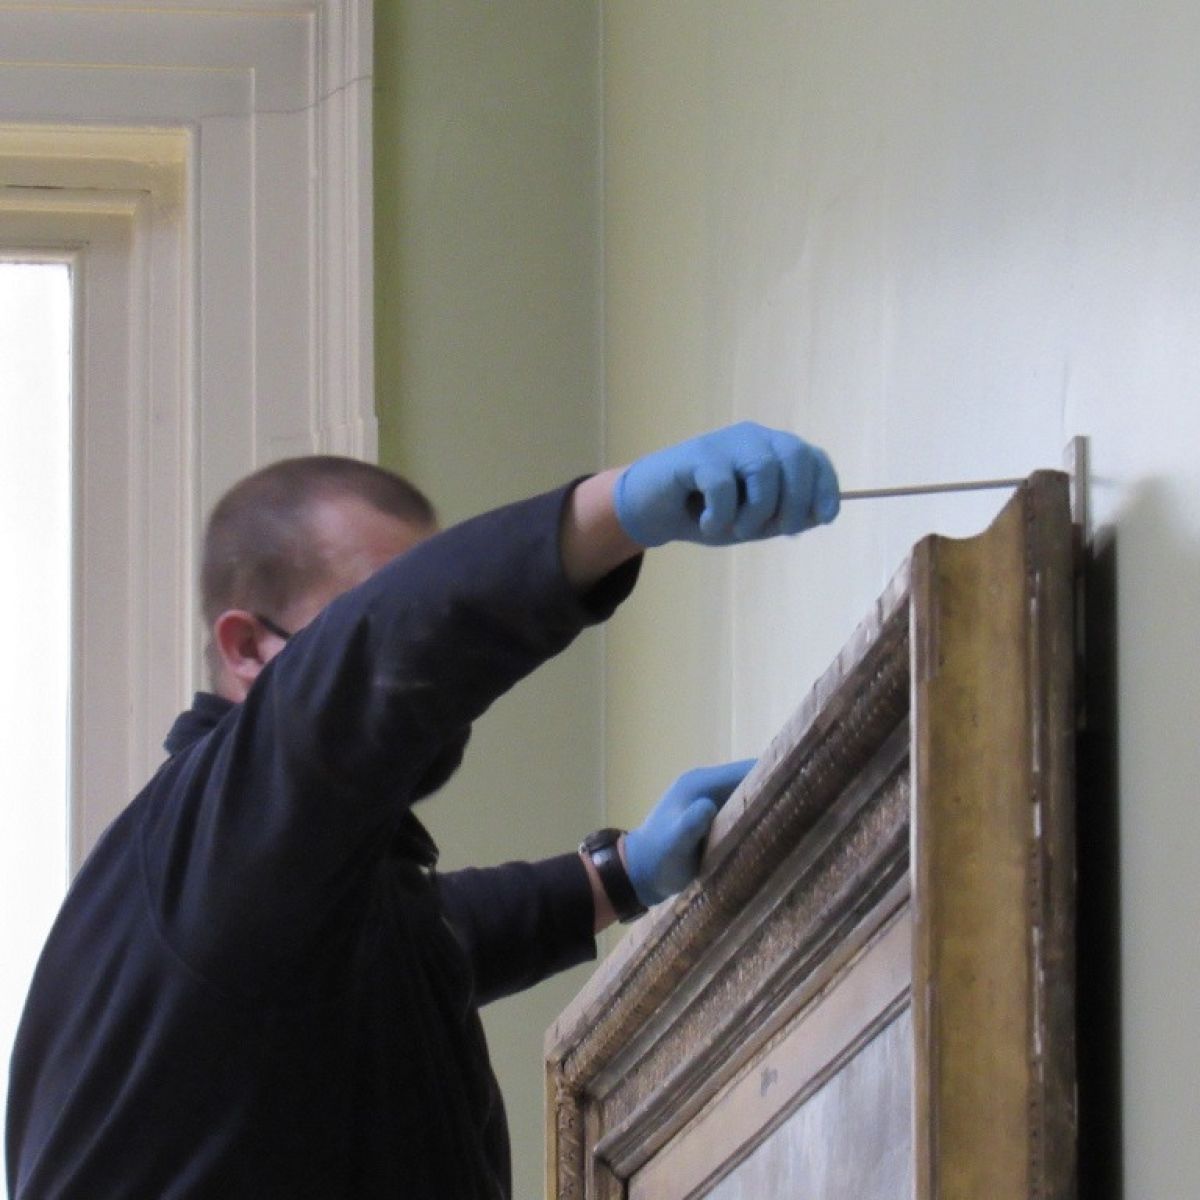 Technicians Start Work To Remove The Painting From The Wall